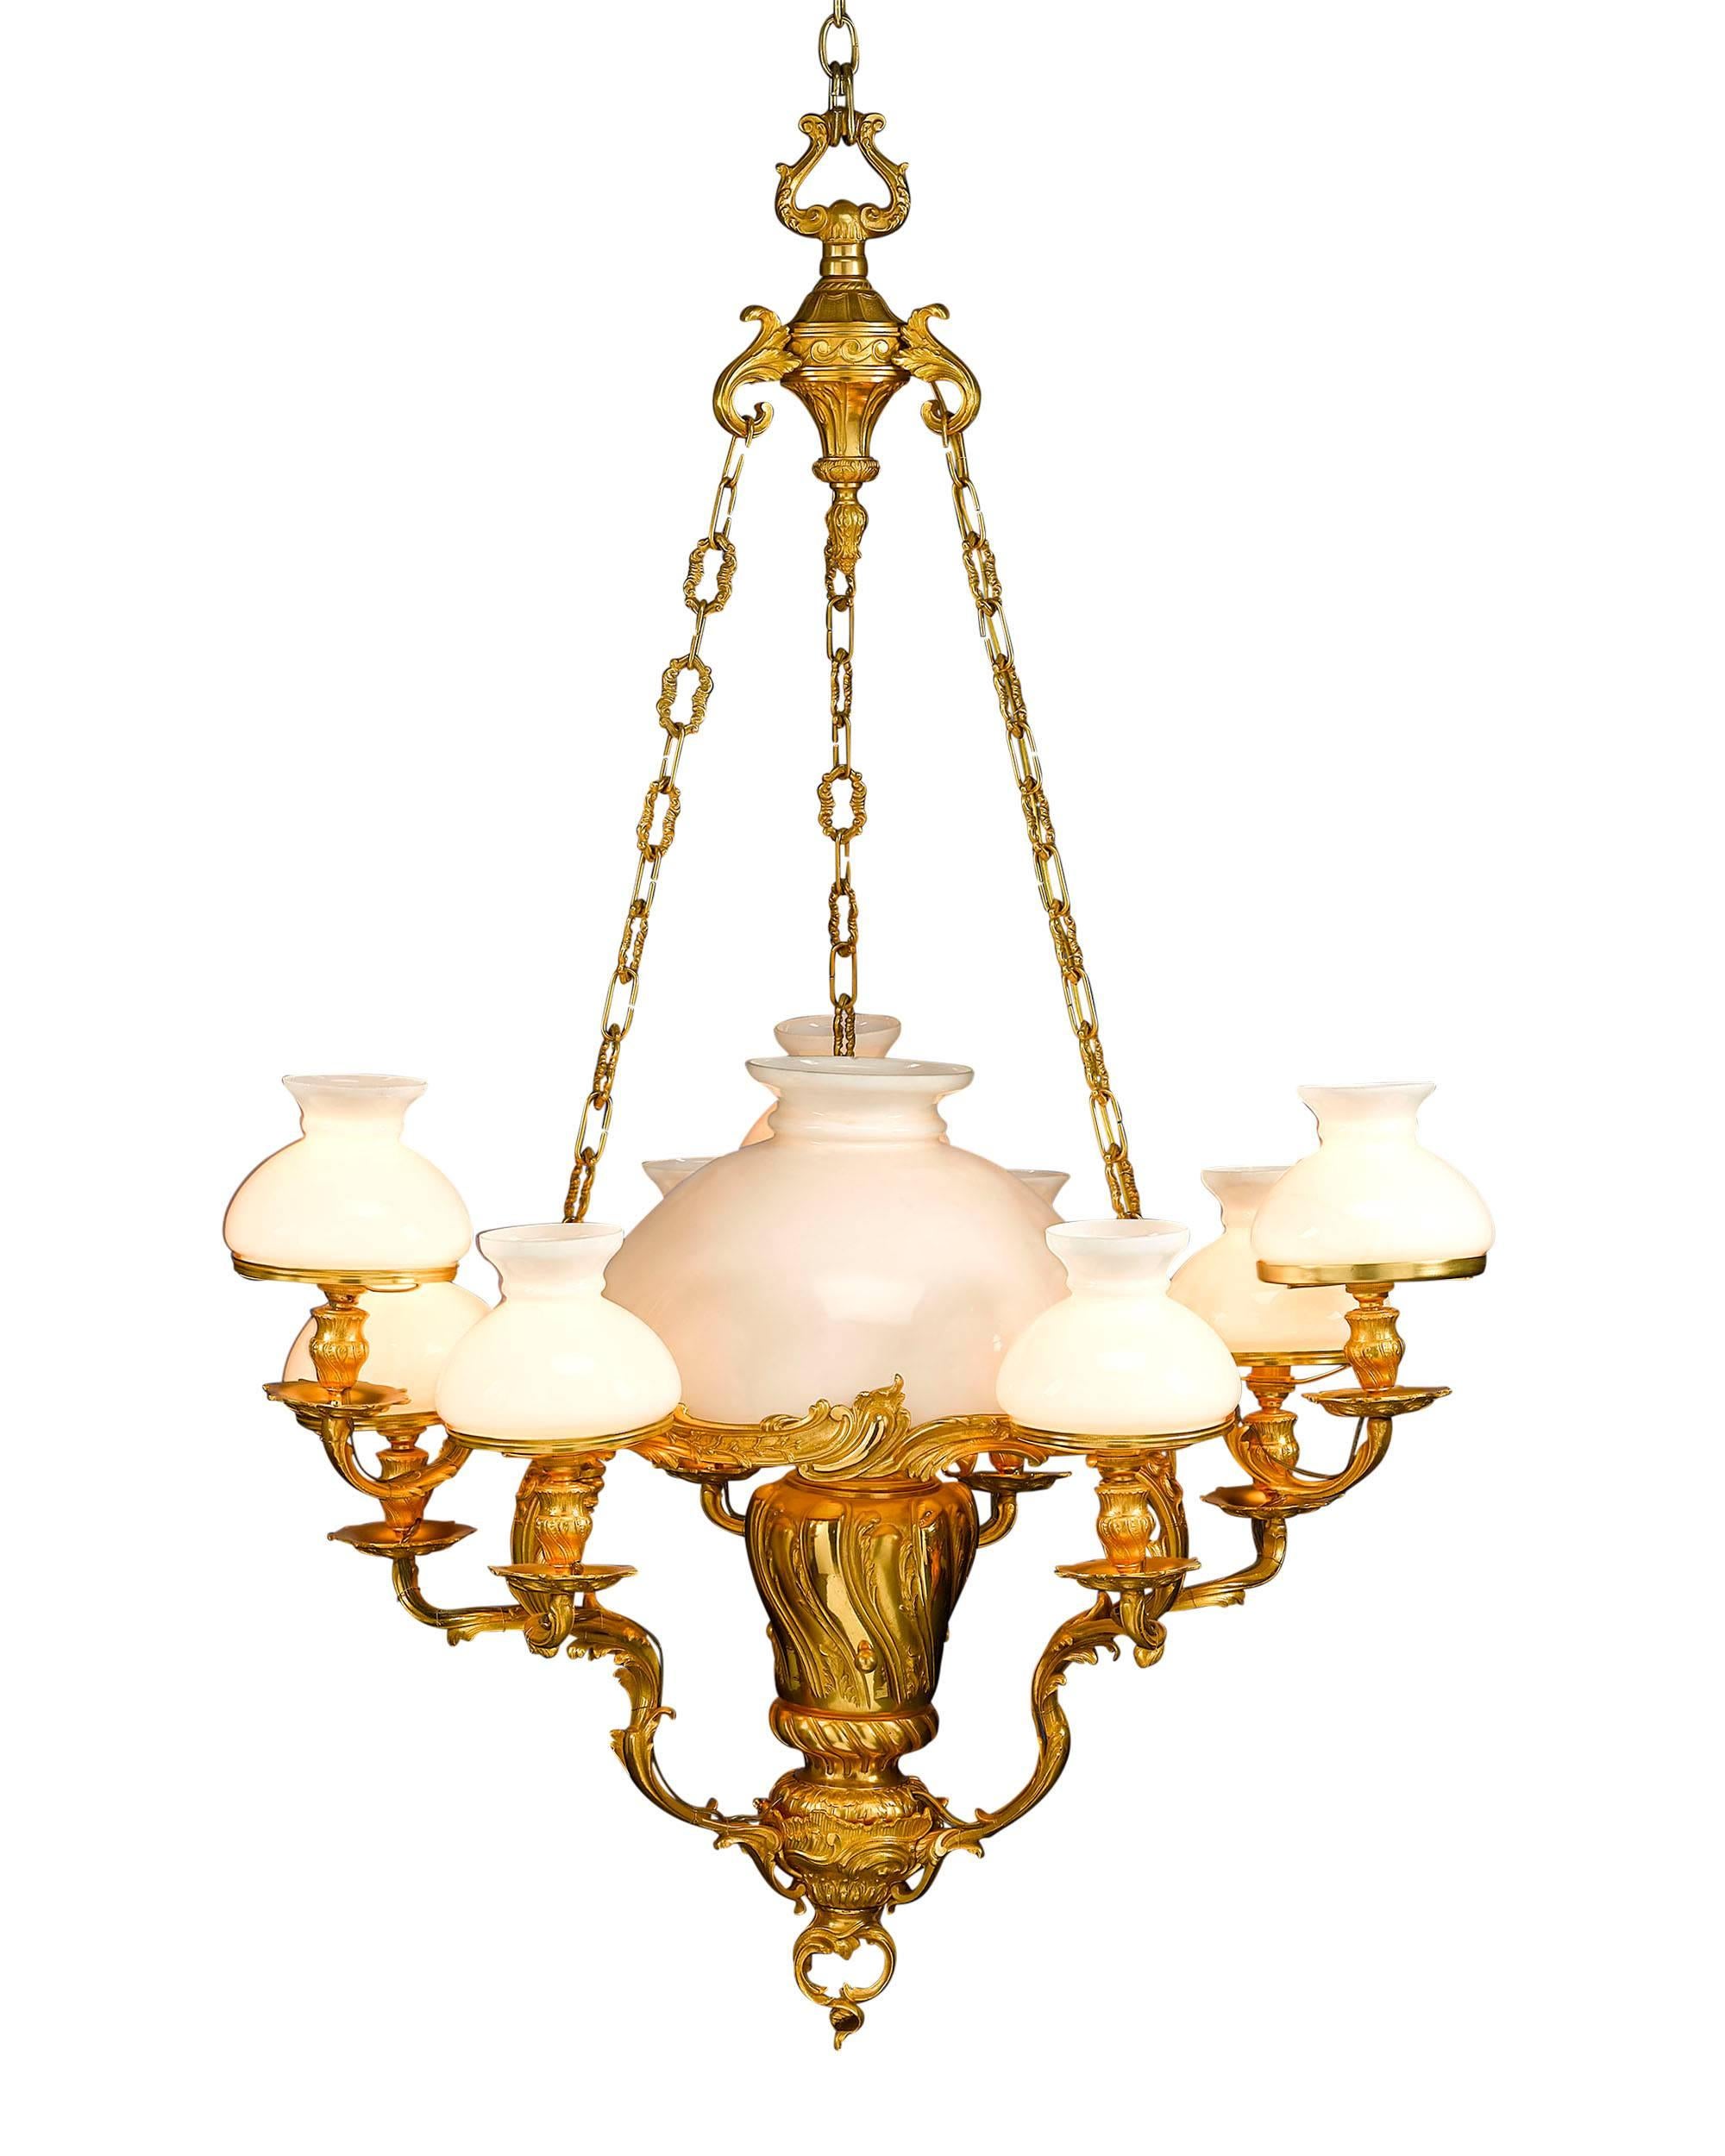 Rococo Revival 19th Century Louis XV-Style Chandelier For Sale